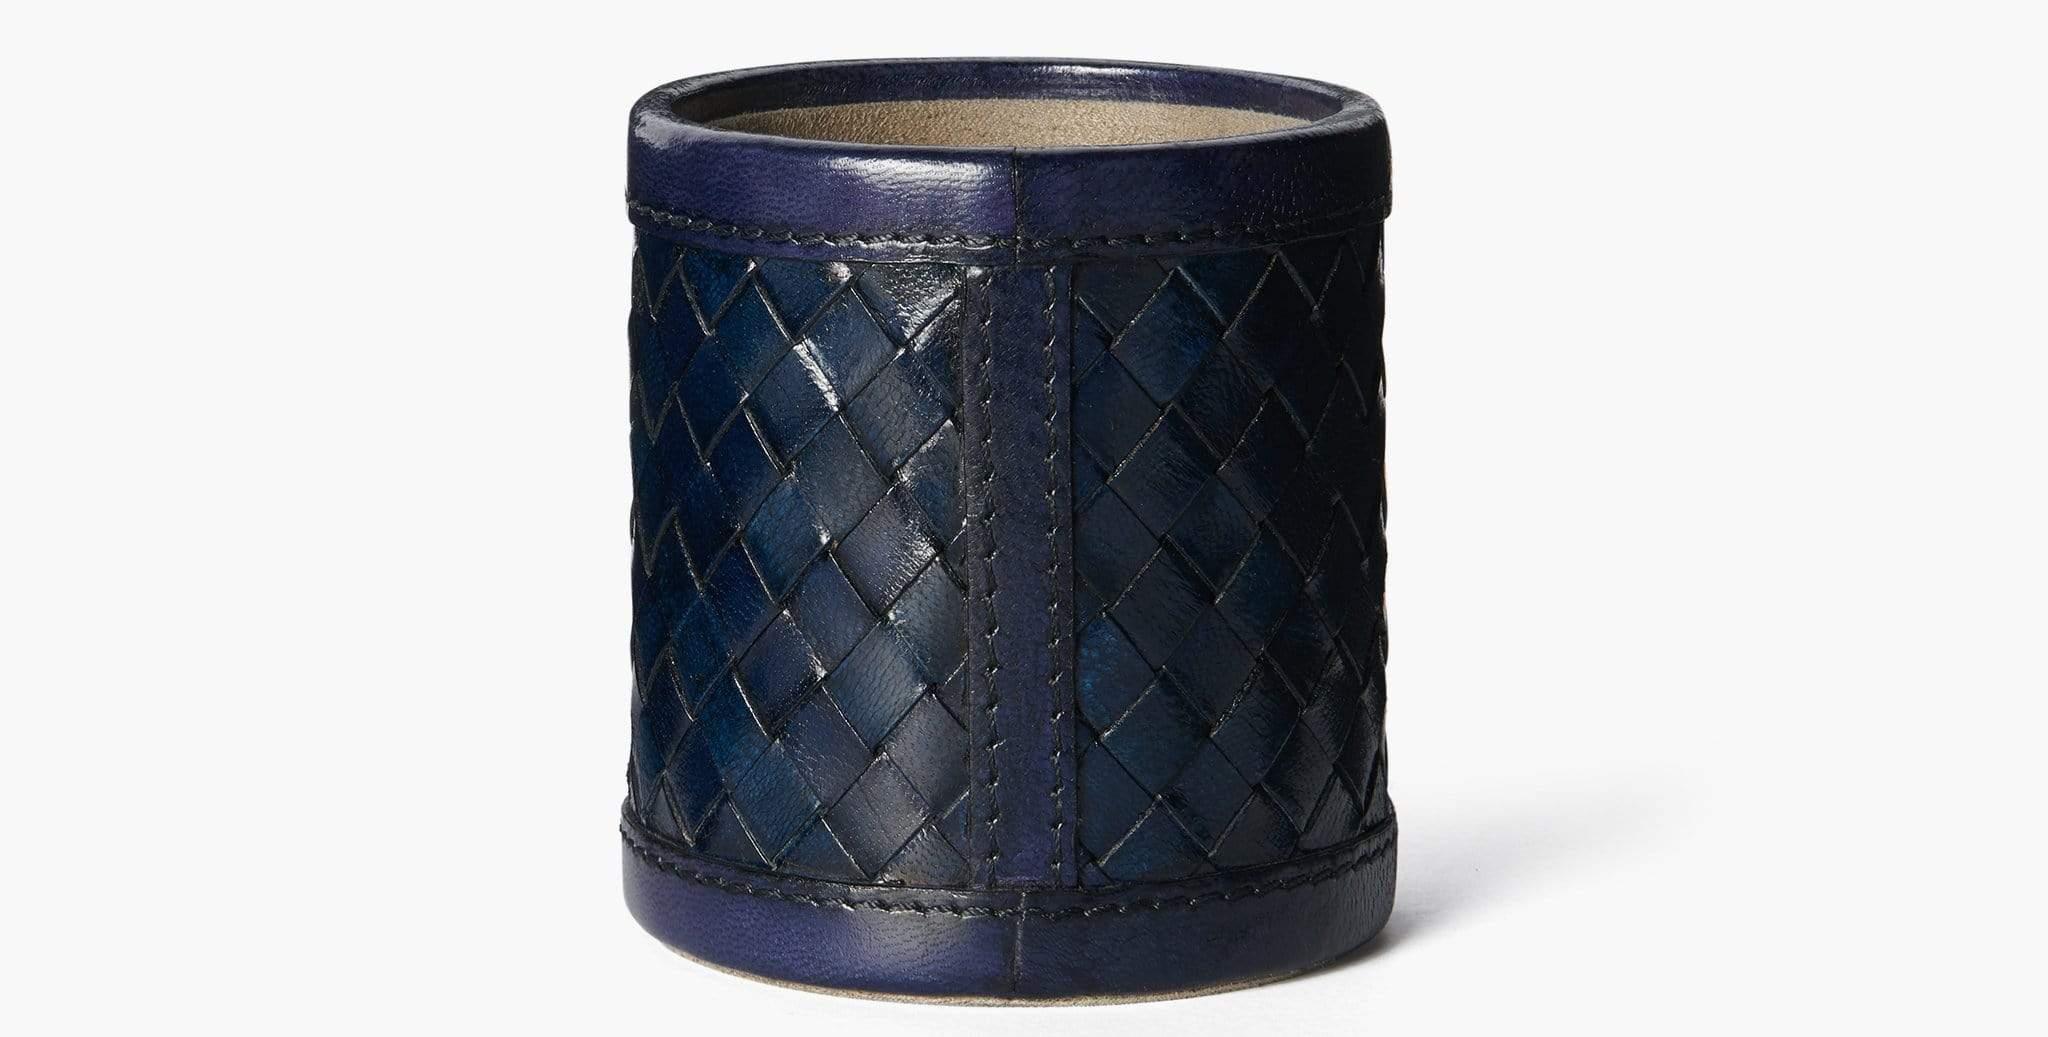 Our Clarion Pen Pot acts as a luxurious and functional decorative accent for your office space. Our handcrafted leathers are inspired by the natural variations within fibers, textures, and weaves. Each selection is one-of-a-kind and slightly unique.